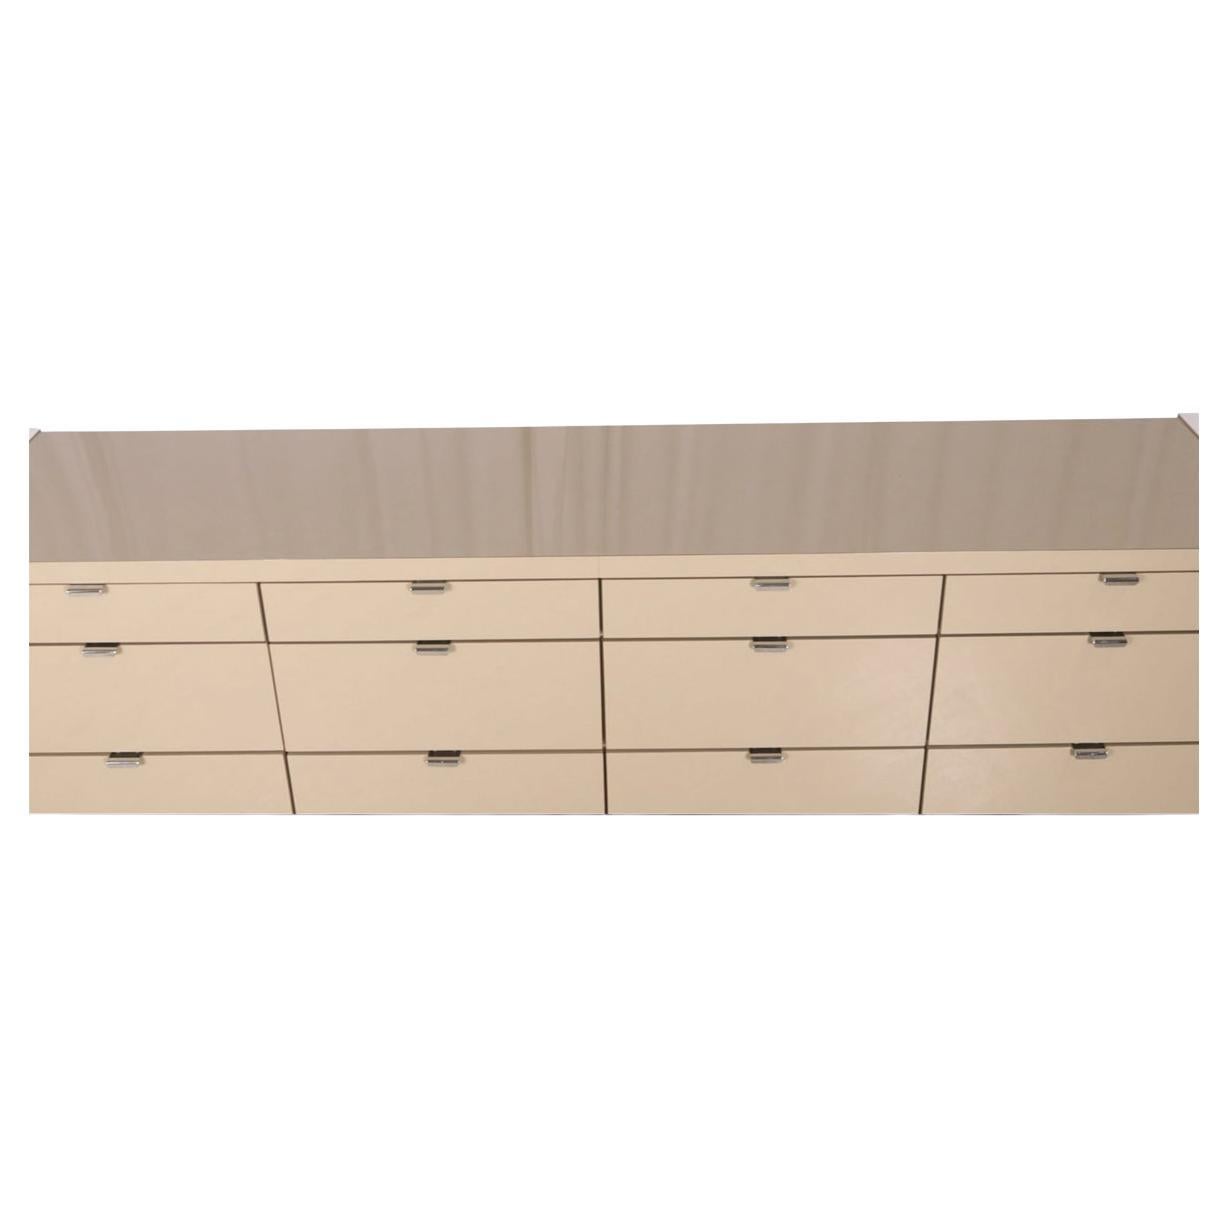 American Post modern taupe lacquer chrome 12 drawer dresser credenza by Ello For Sale